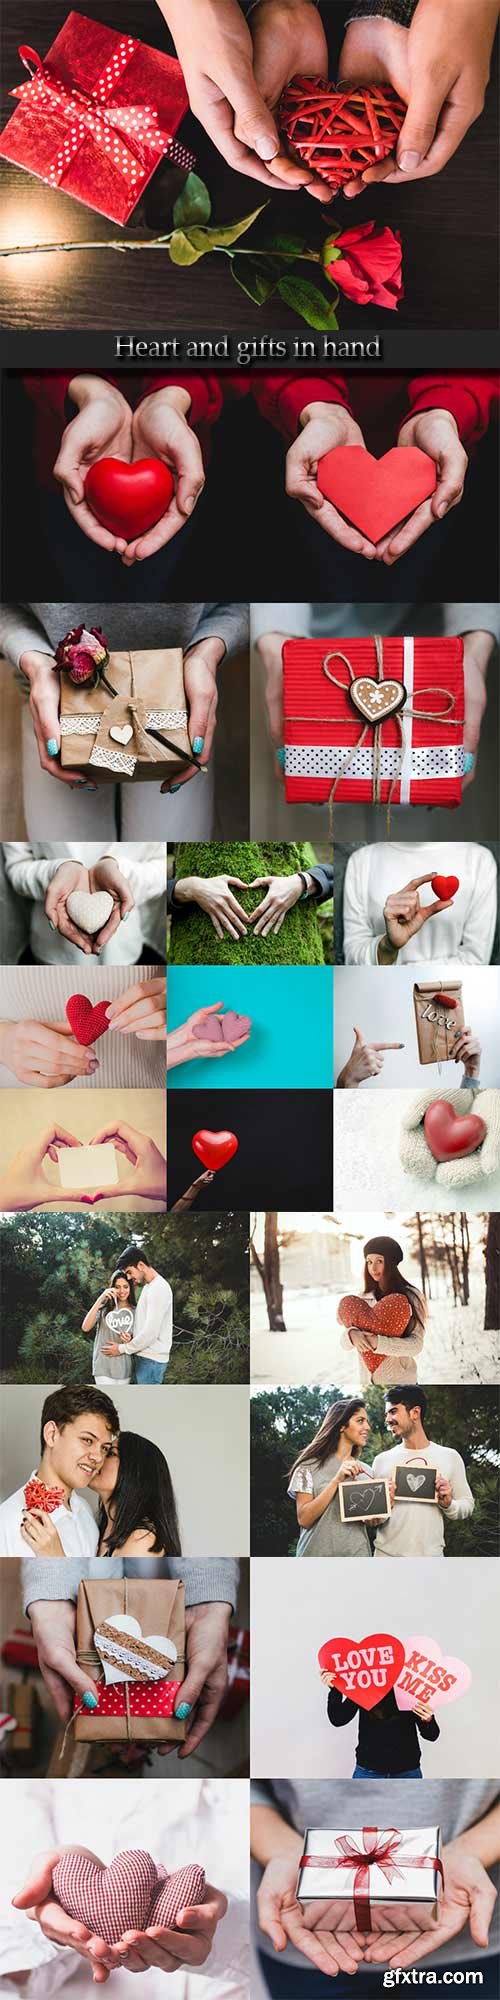 Heart and gifts in hand